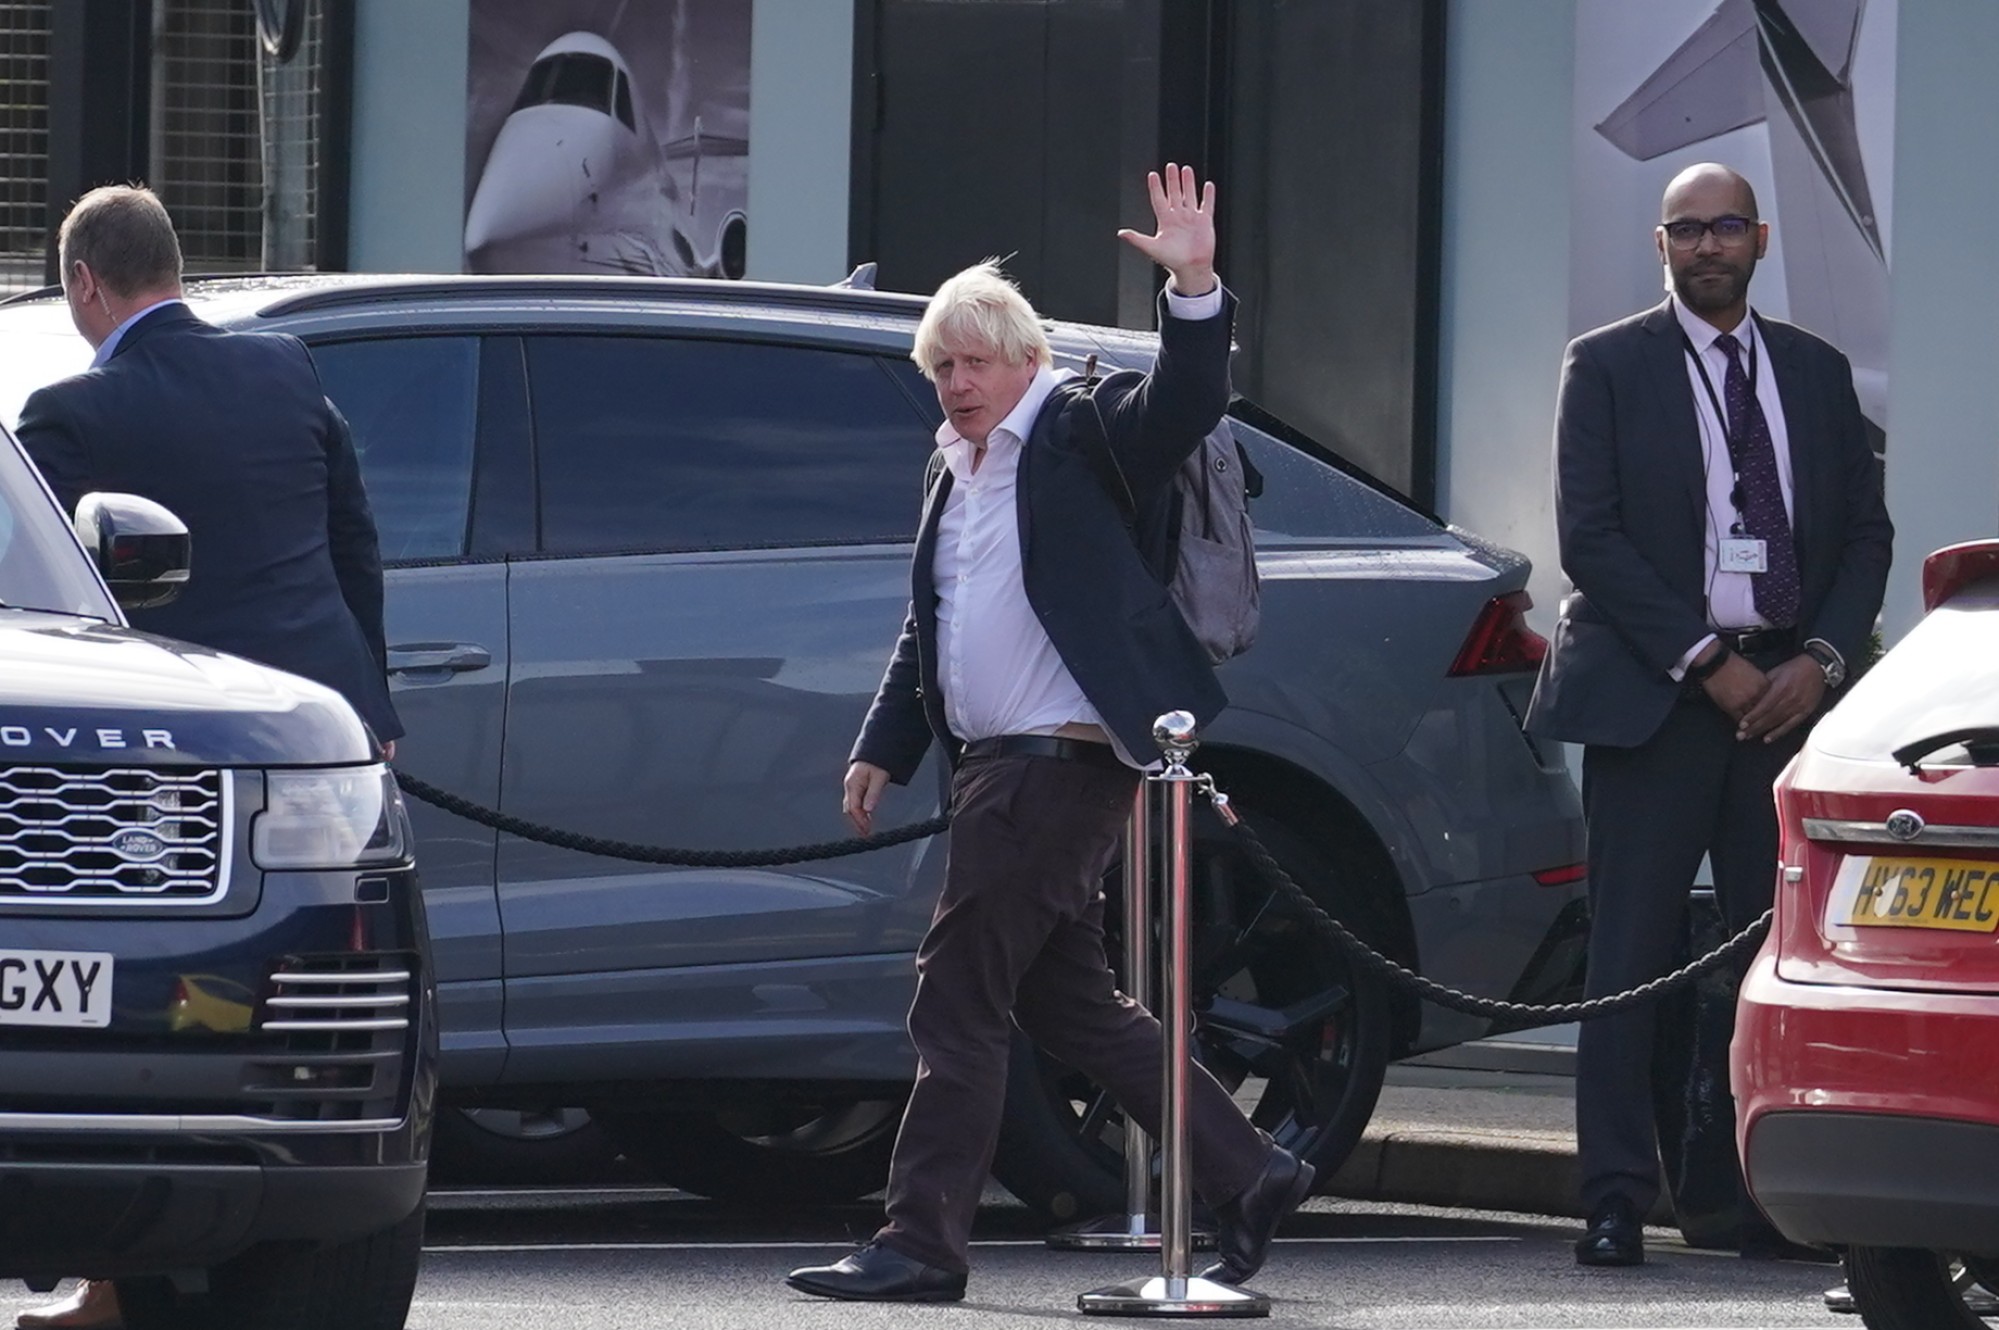 Boris Johnson arriving at Gatwick Airport in London, after travelling on a flight from the Caribbean. Photo: AP